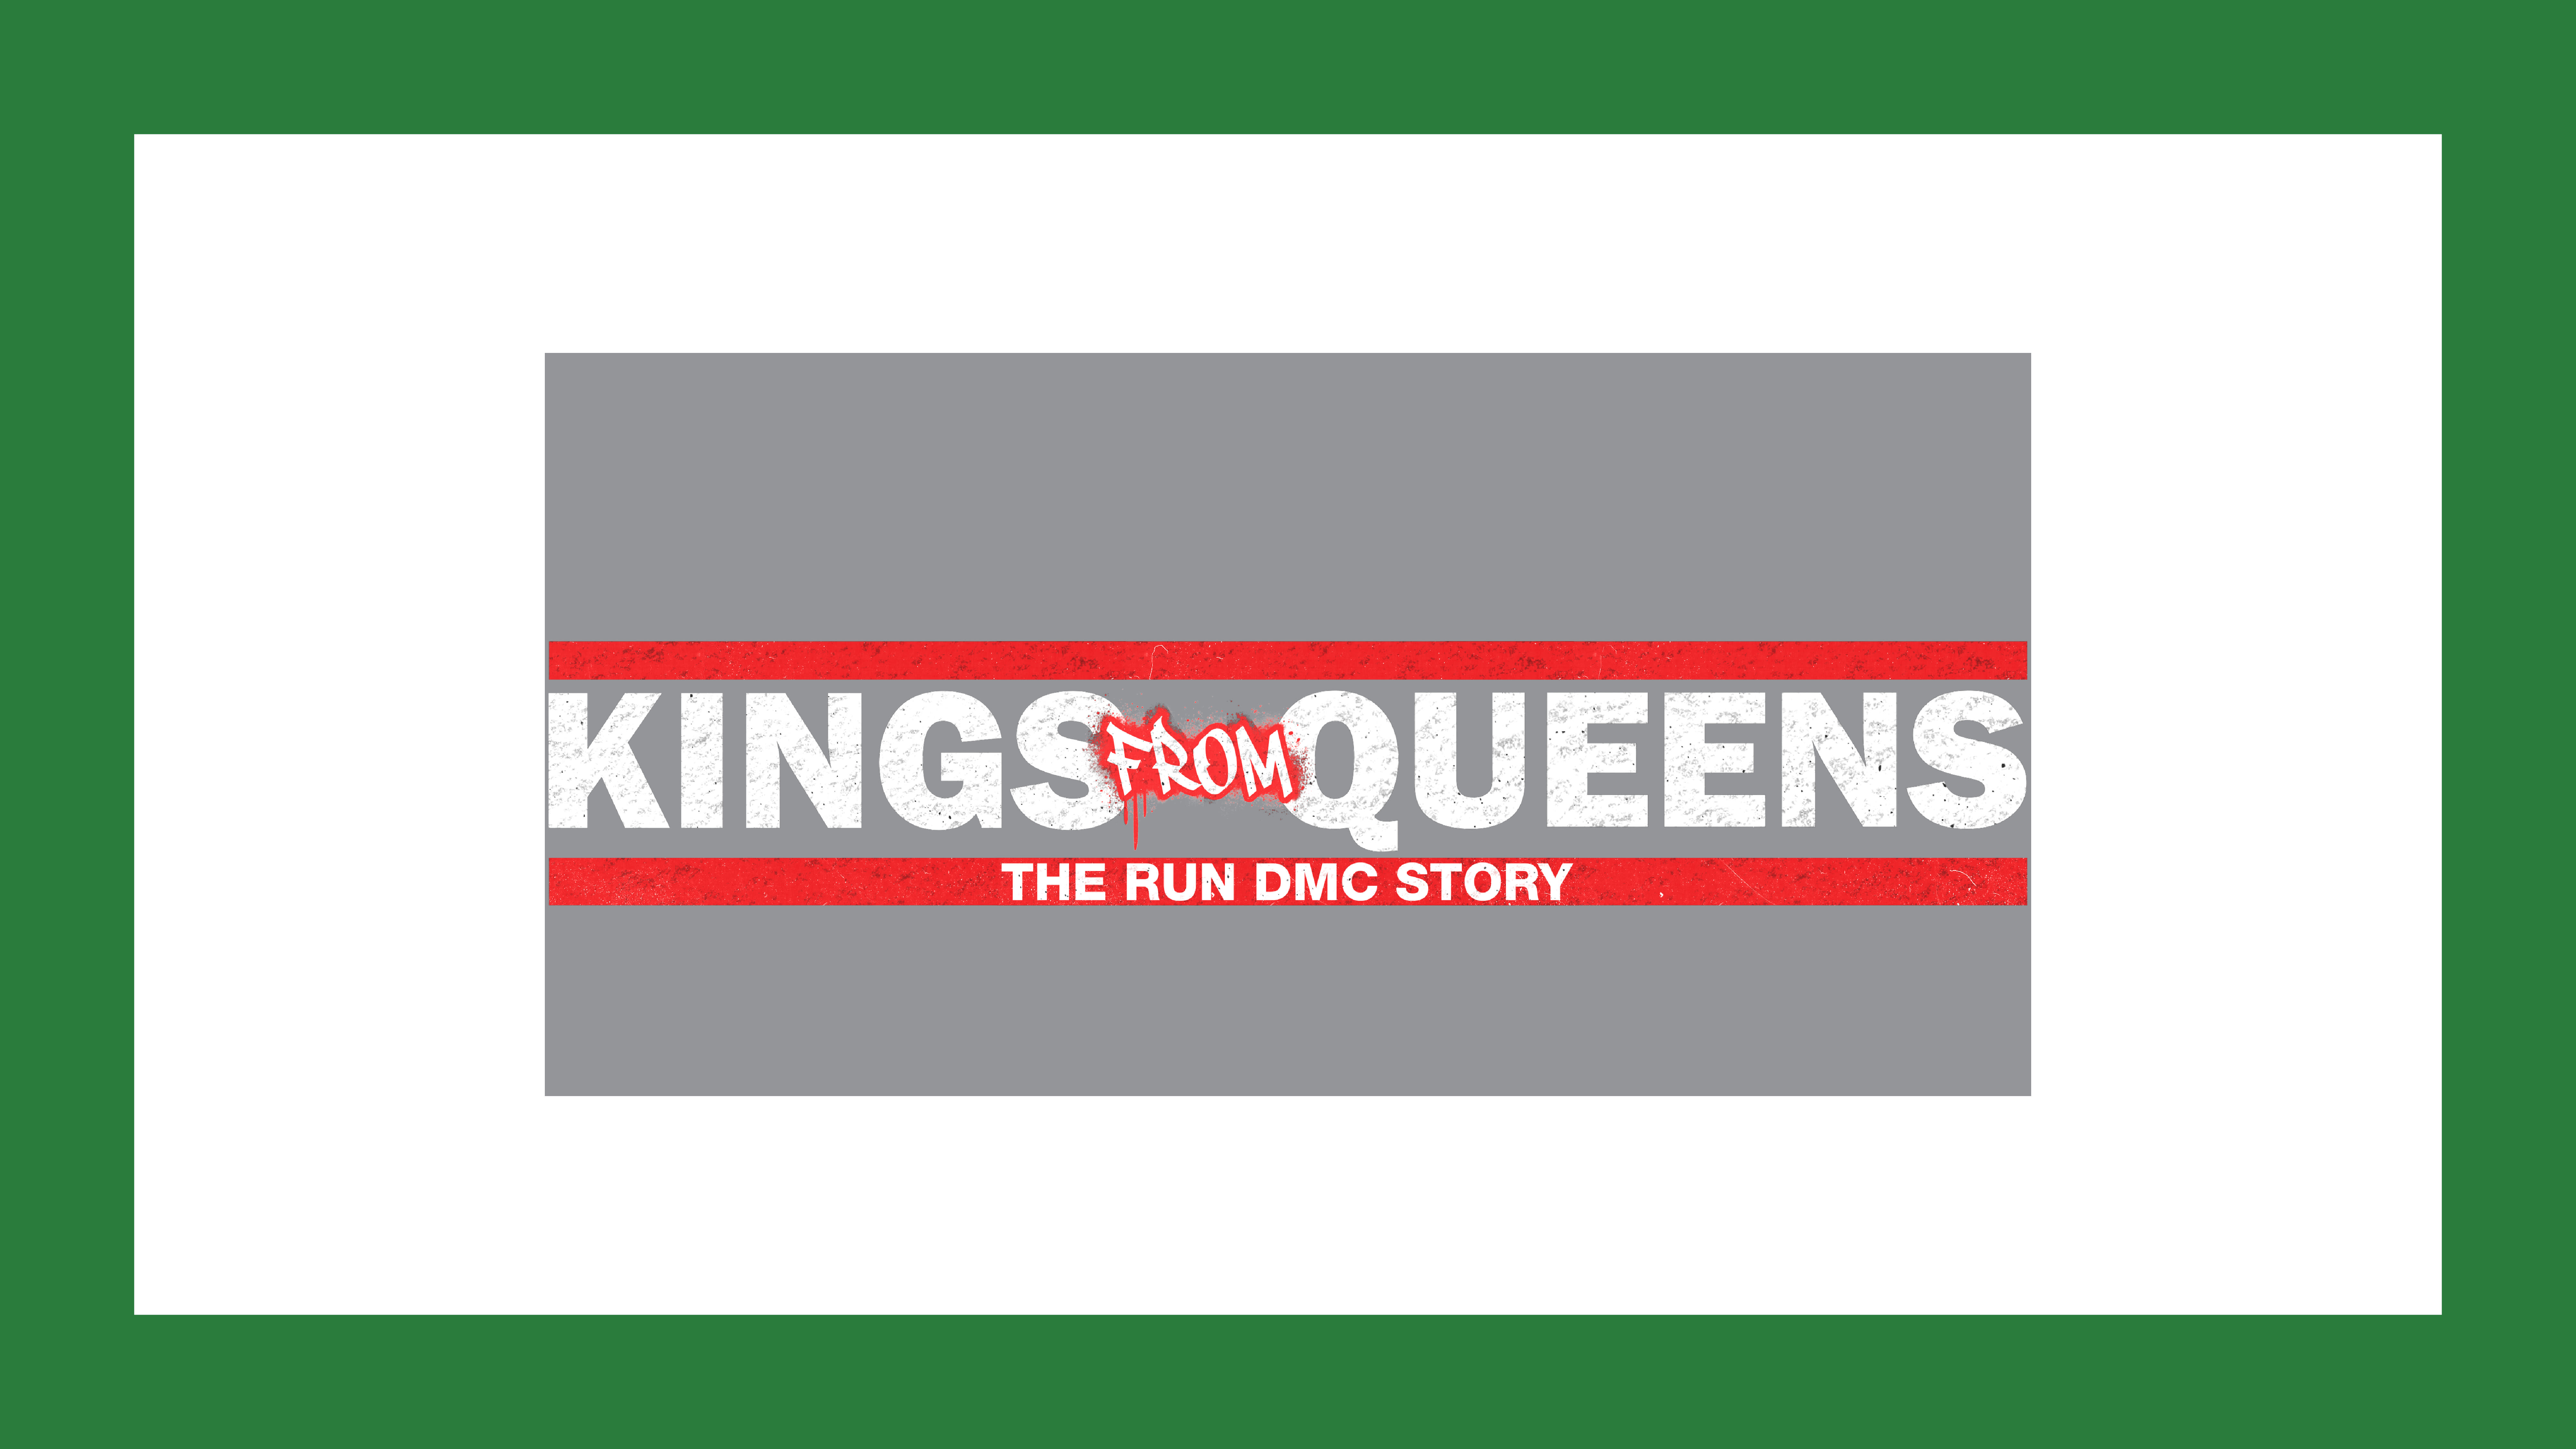 ‘Kings From Queens: The Story Of Run DMC’ Shows How Hip Hop Pioneers “Changed Pop, Changed Fashion, ...